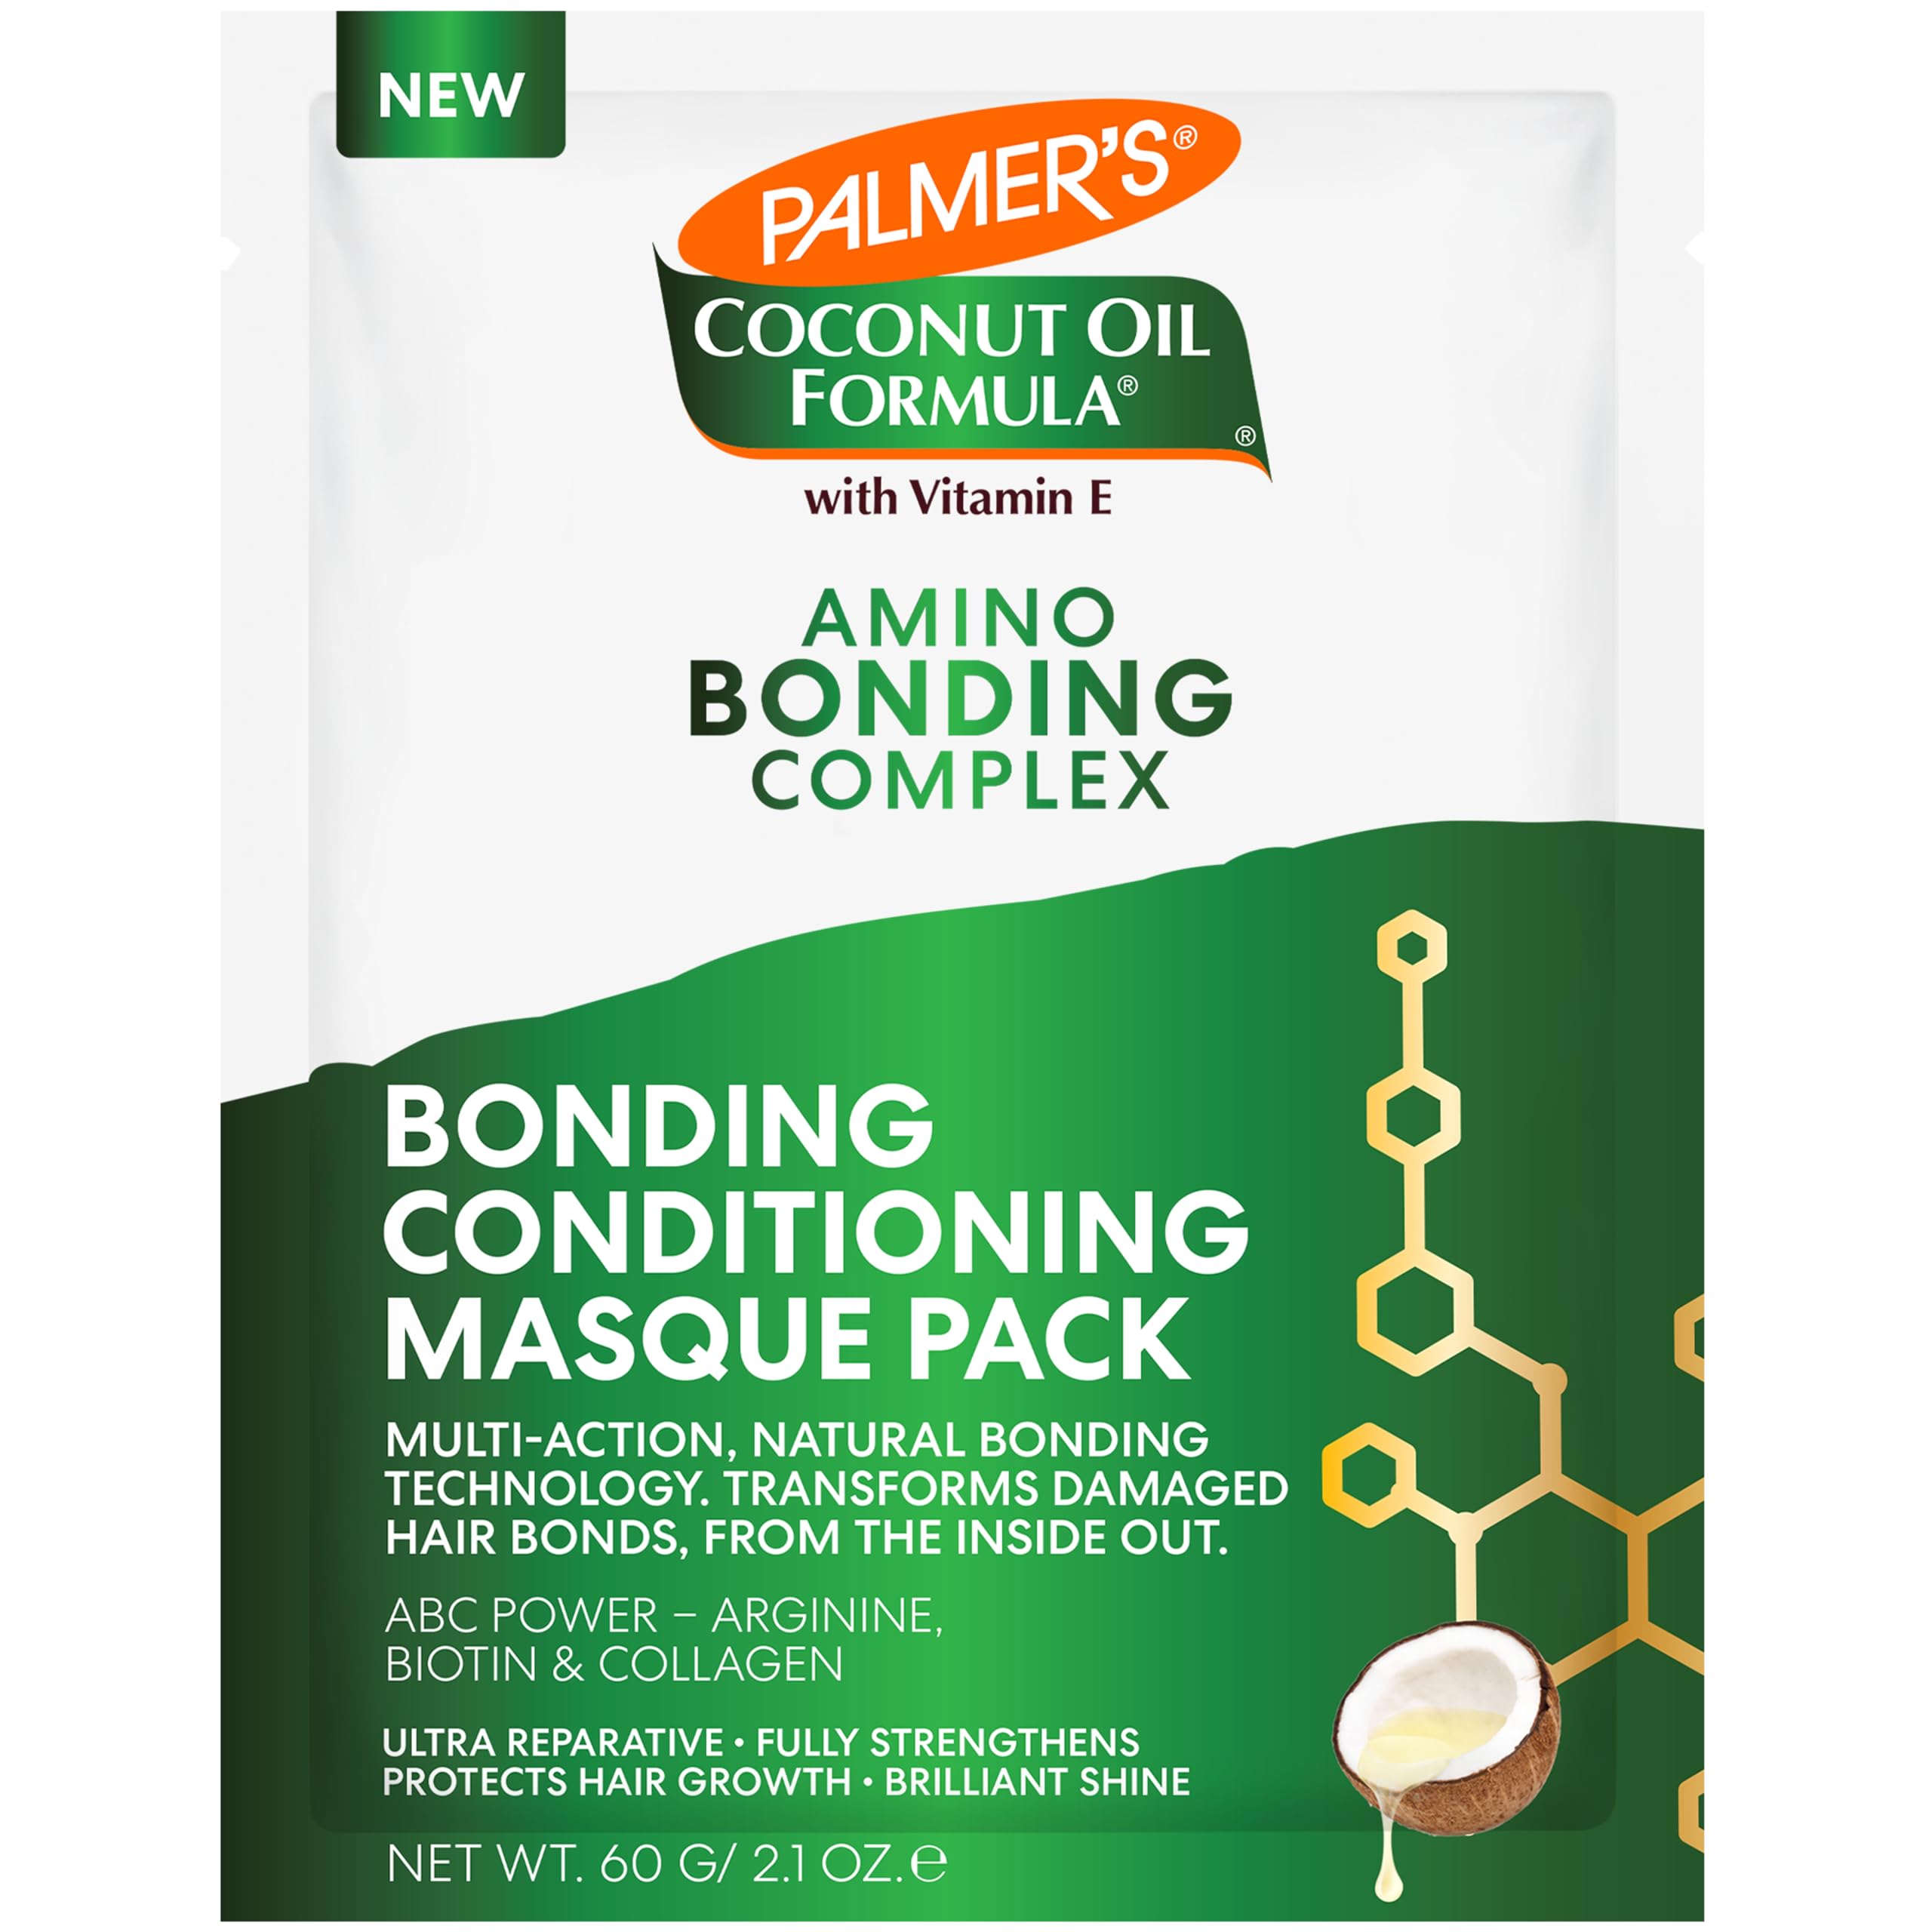 Palmer's Amino Bonding Complex Hair Mask, Intense Conditioning Masque Pack with Coconut Oil & Vitamin E, Heat Protectant, Anti Frizz, Adds Shine, Protects Hair Growth, All Hair Types, 2.1 oz packette